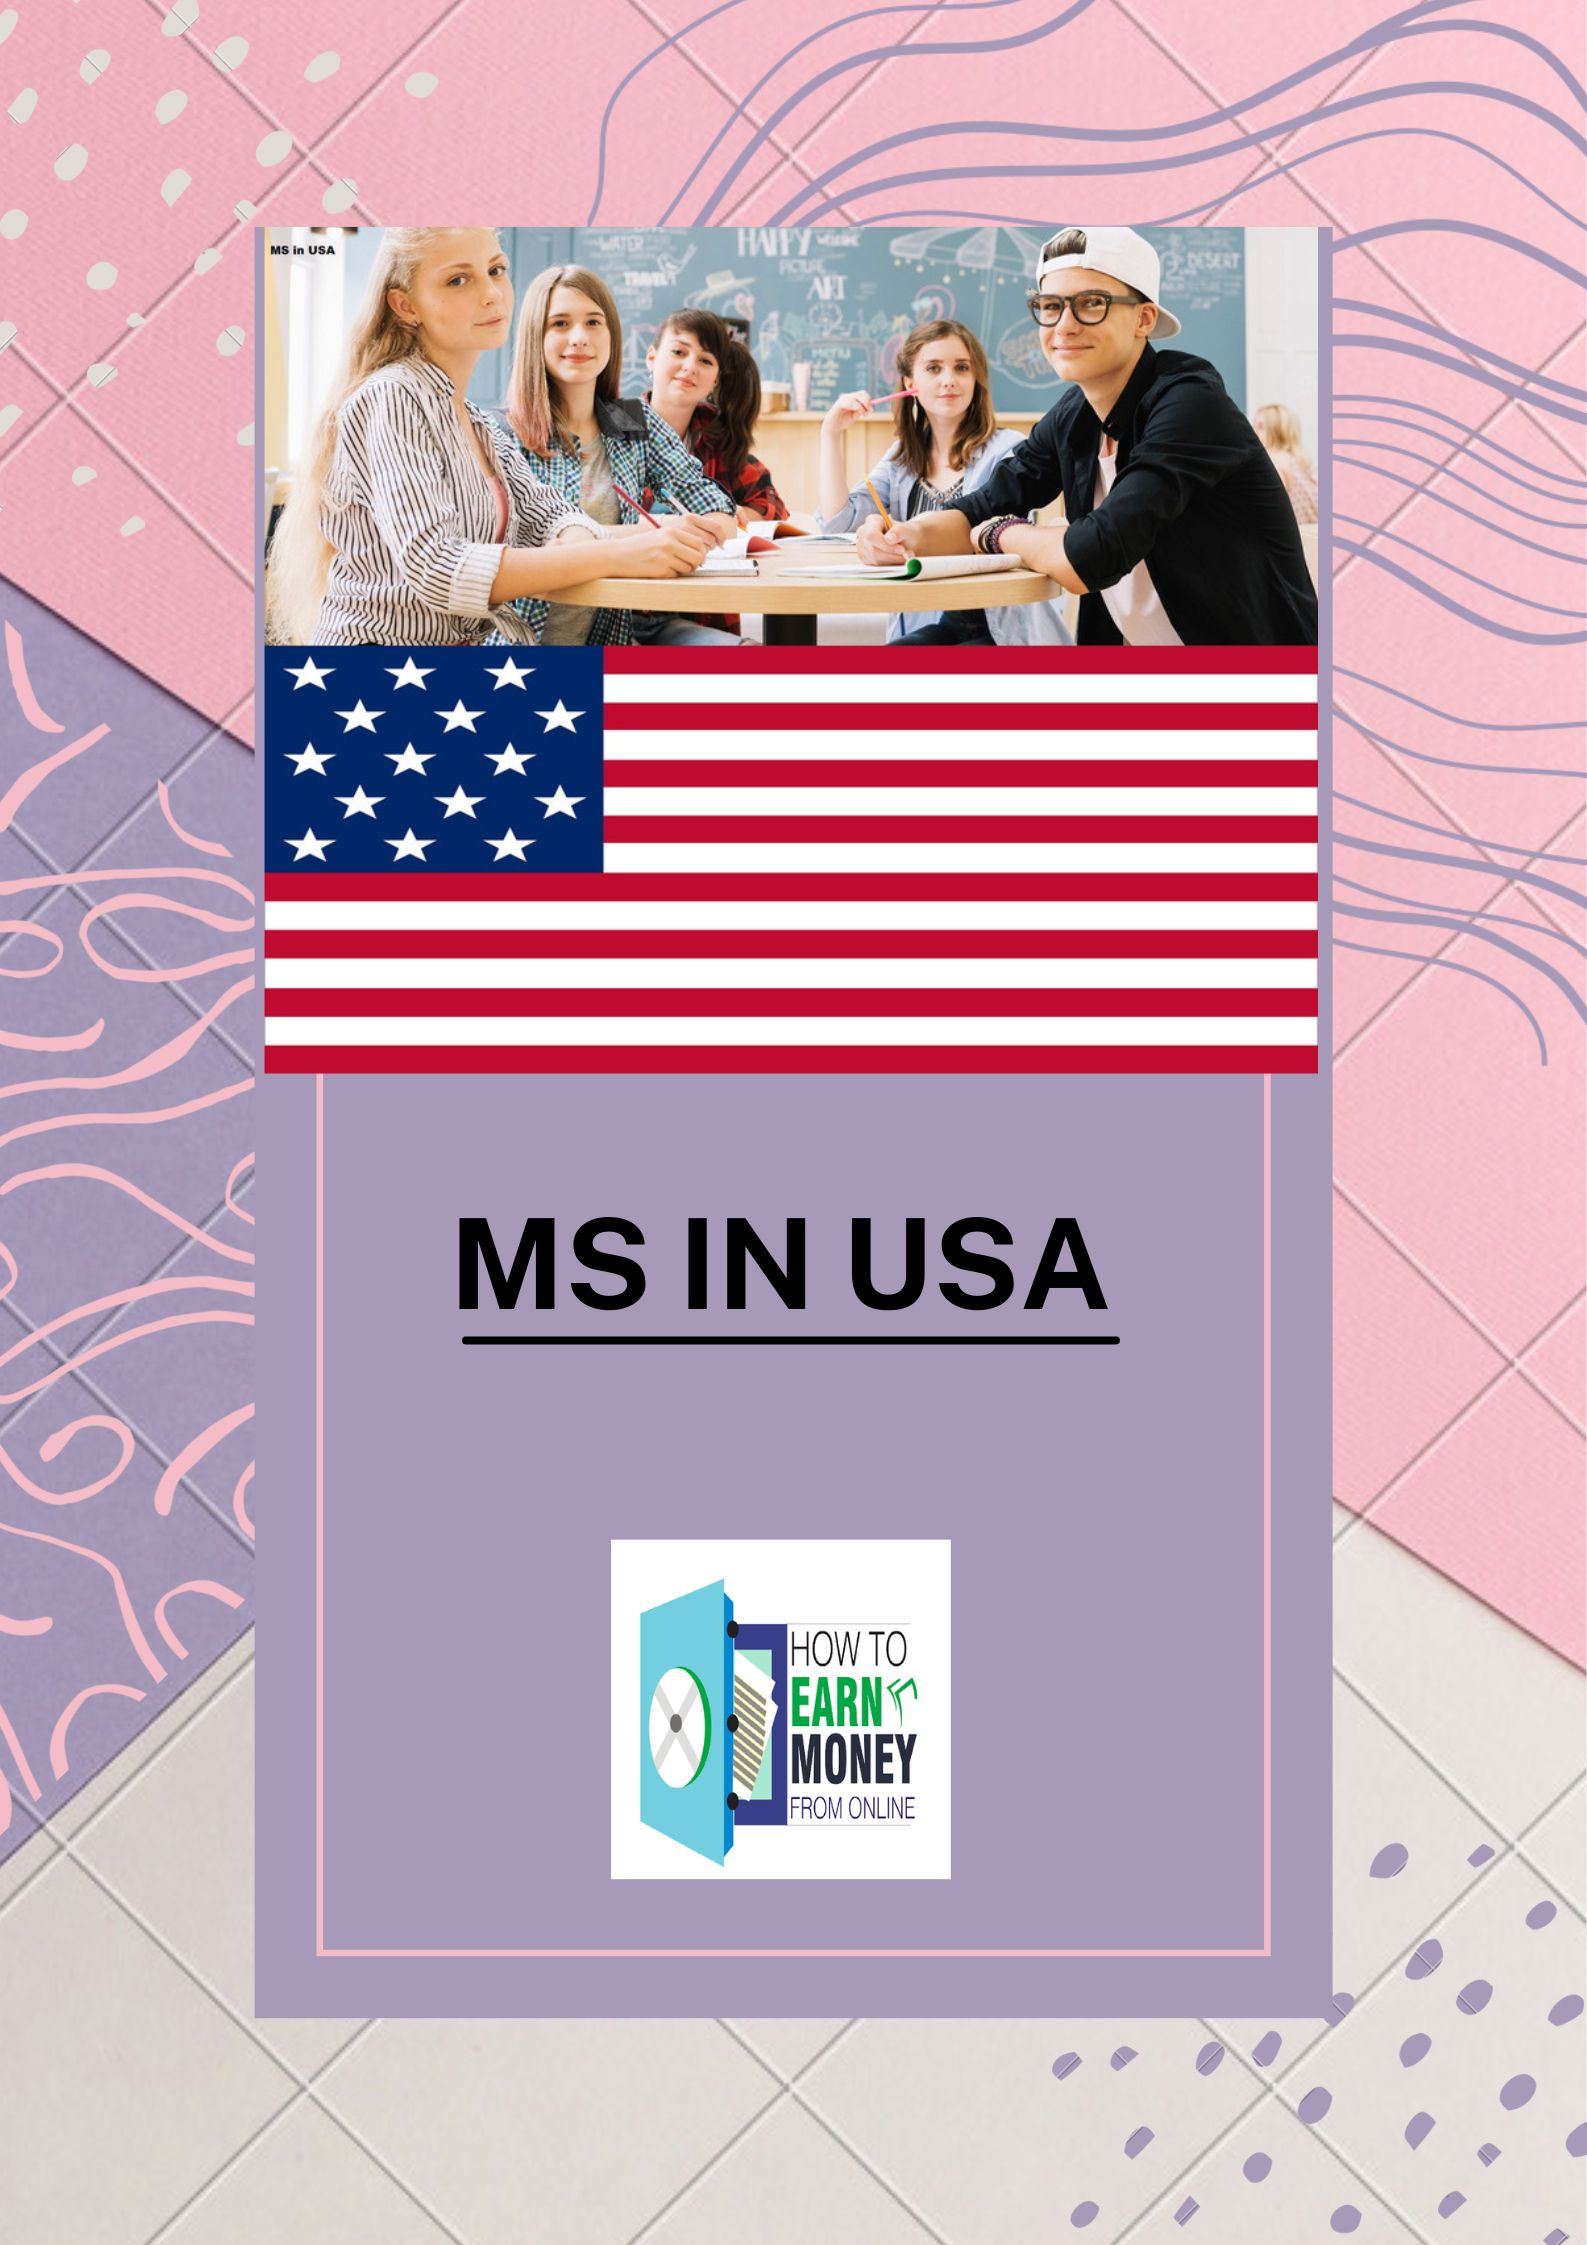 (MS in USA)